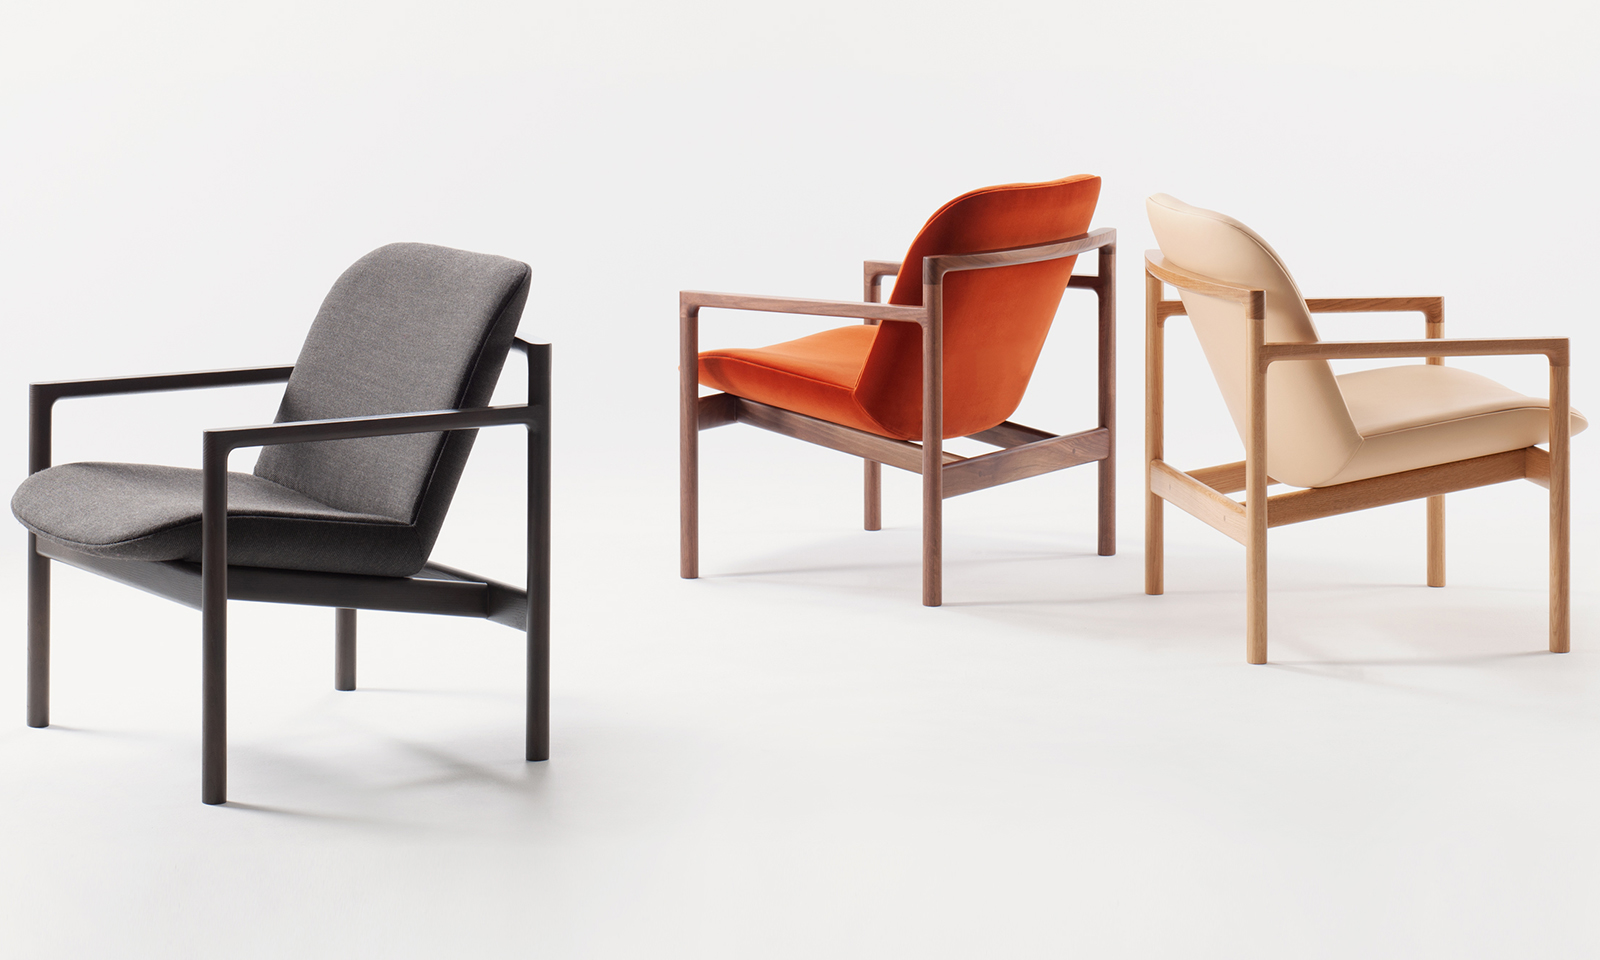 collection by Tim Rundle | Design Insider